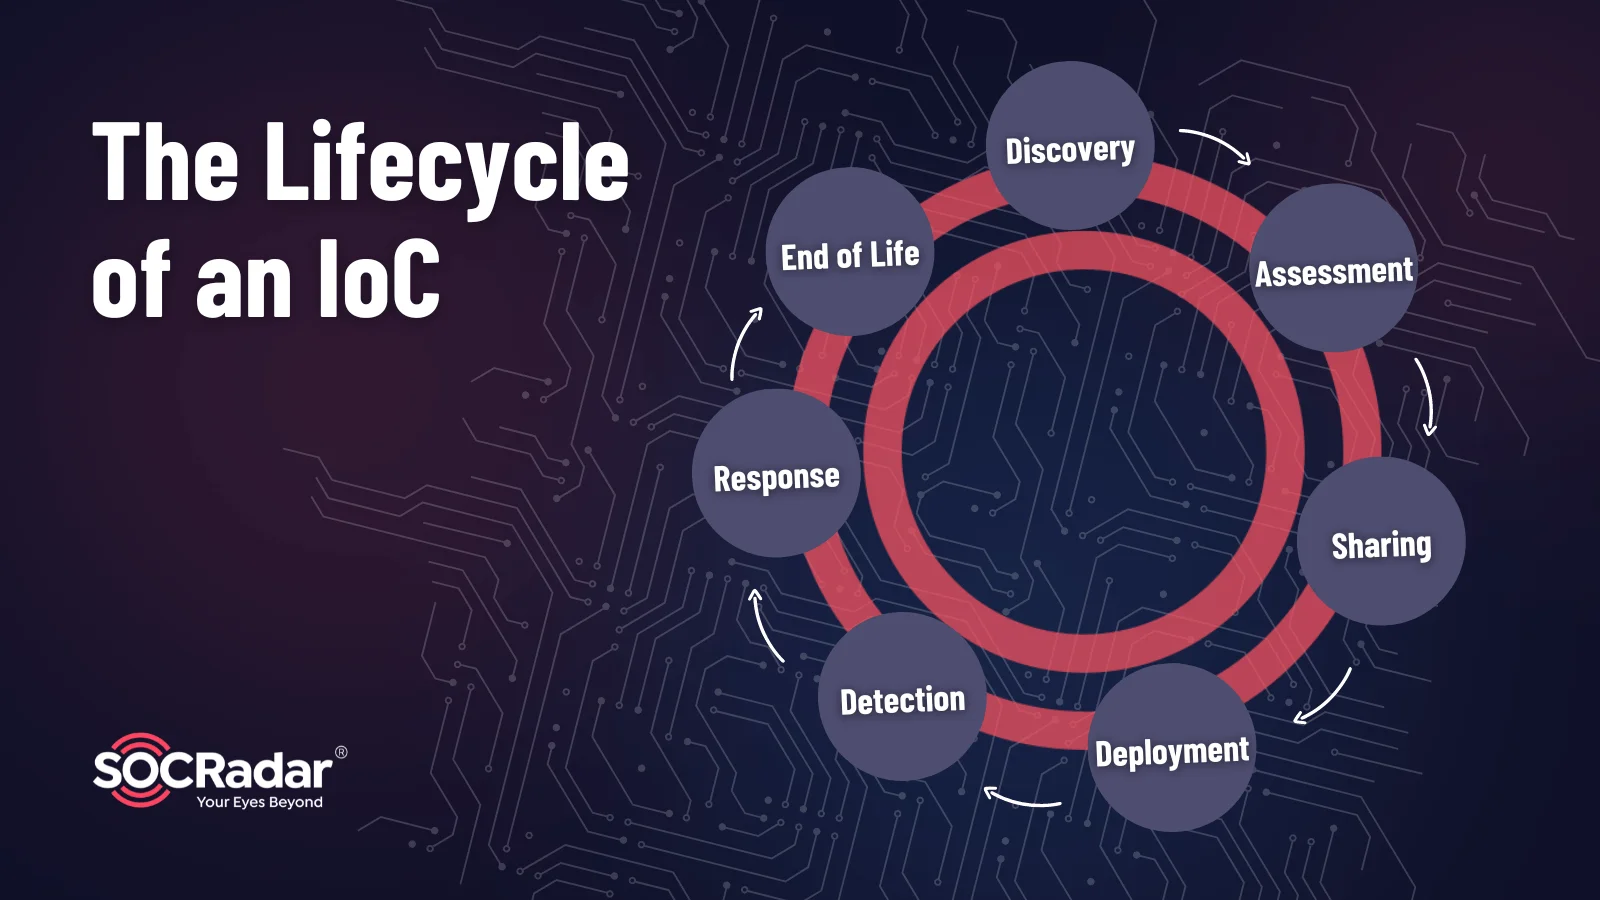 The Lifecycle of an IoC